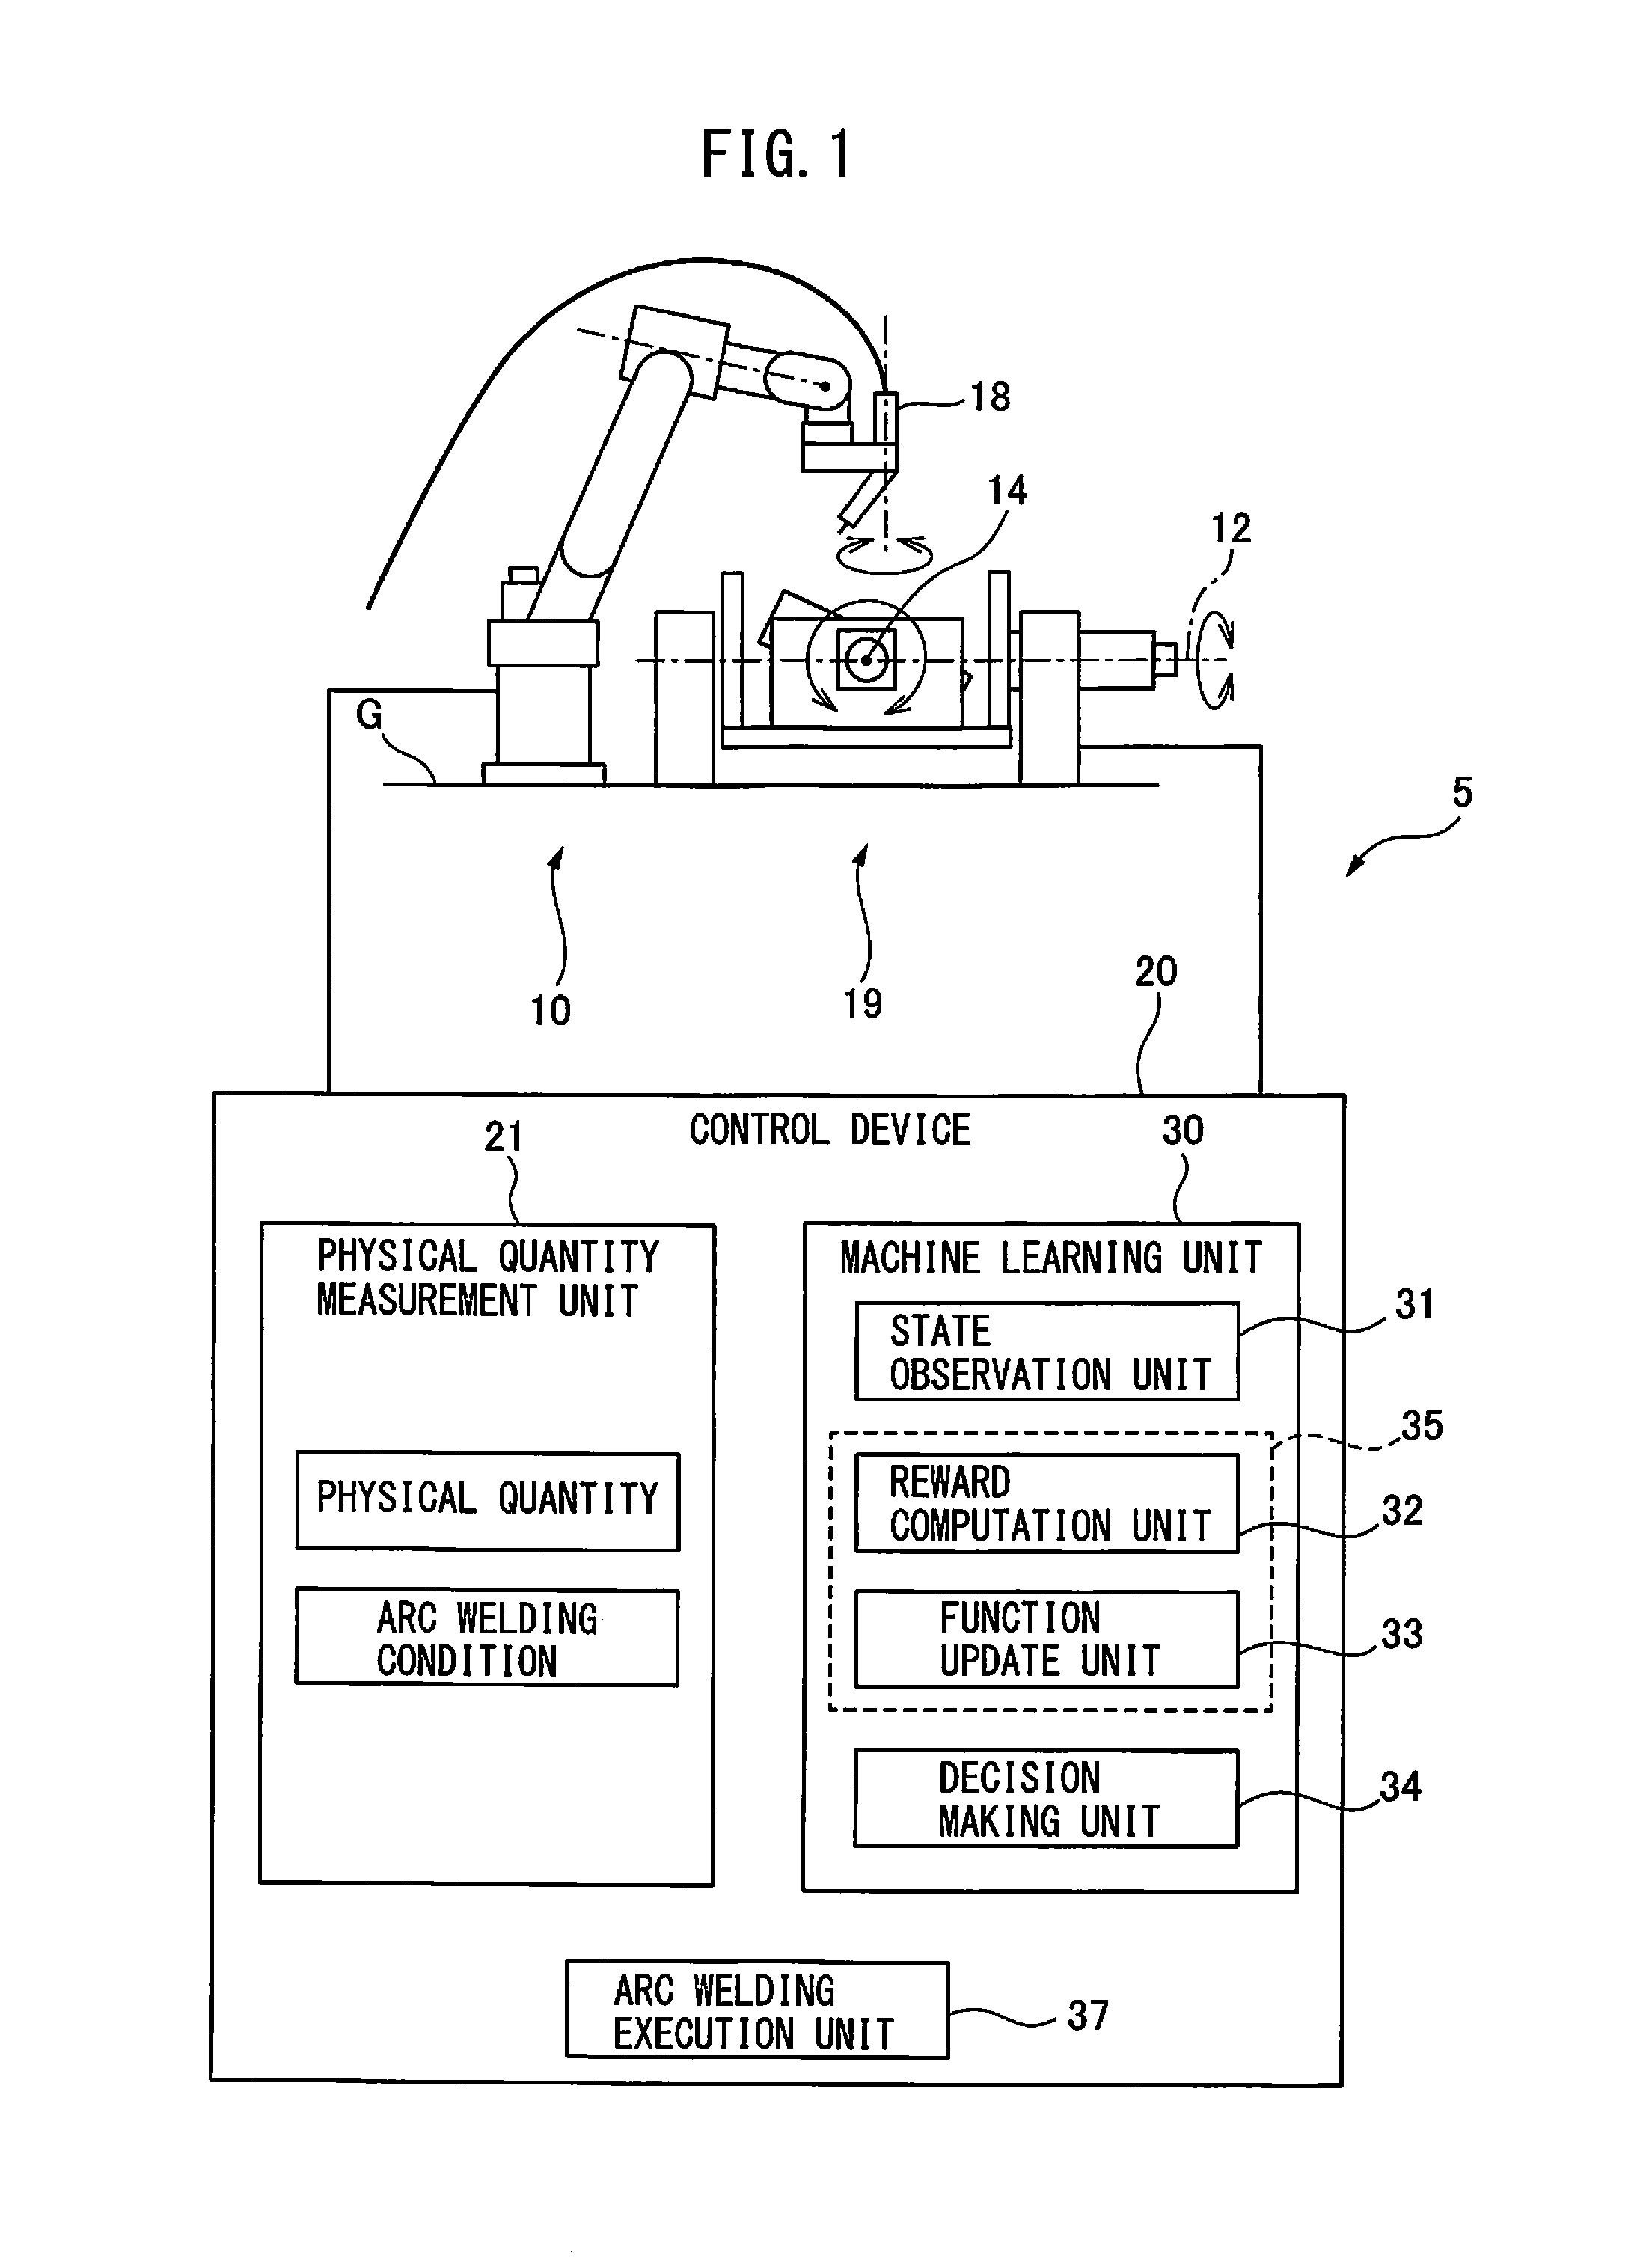 Machine learning device, arc welding control device, arc welding robot system, and welding system